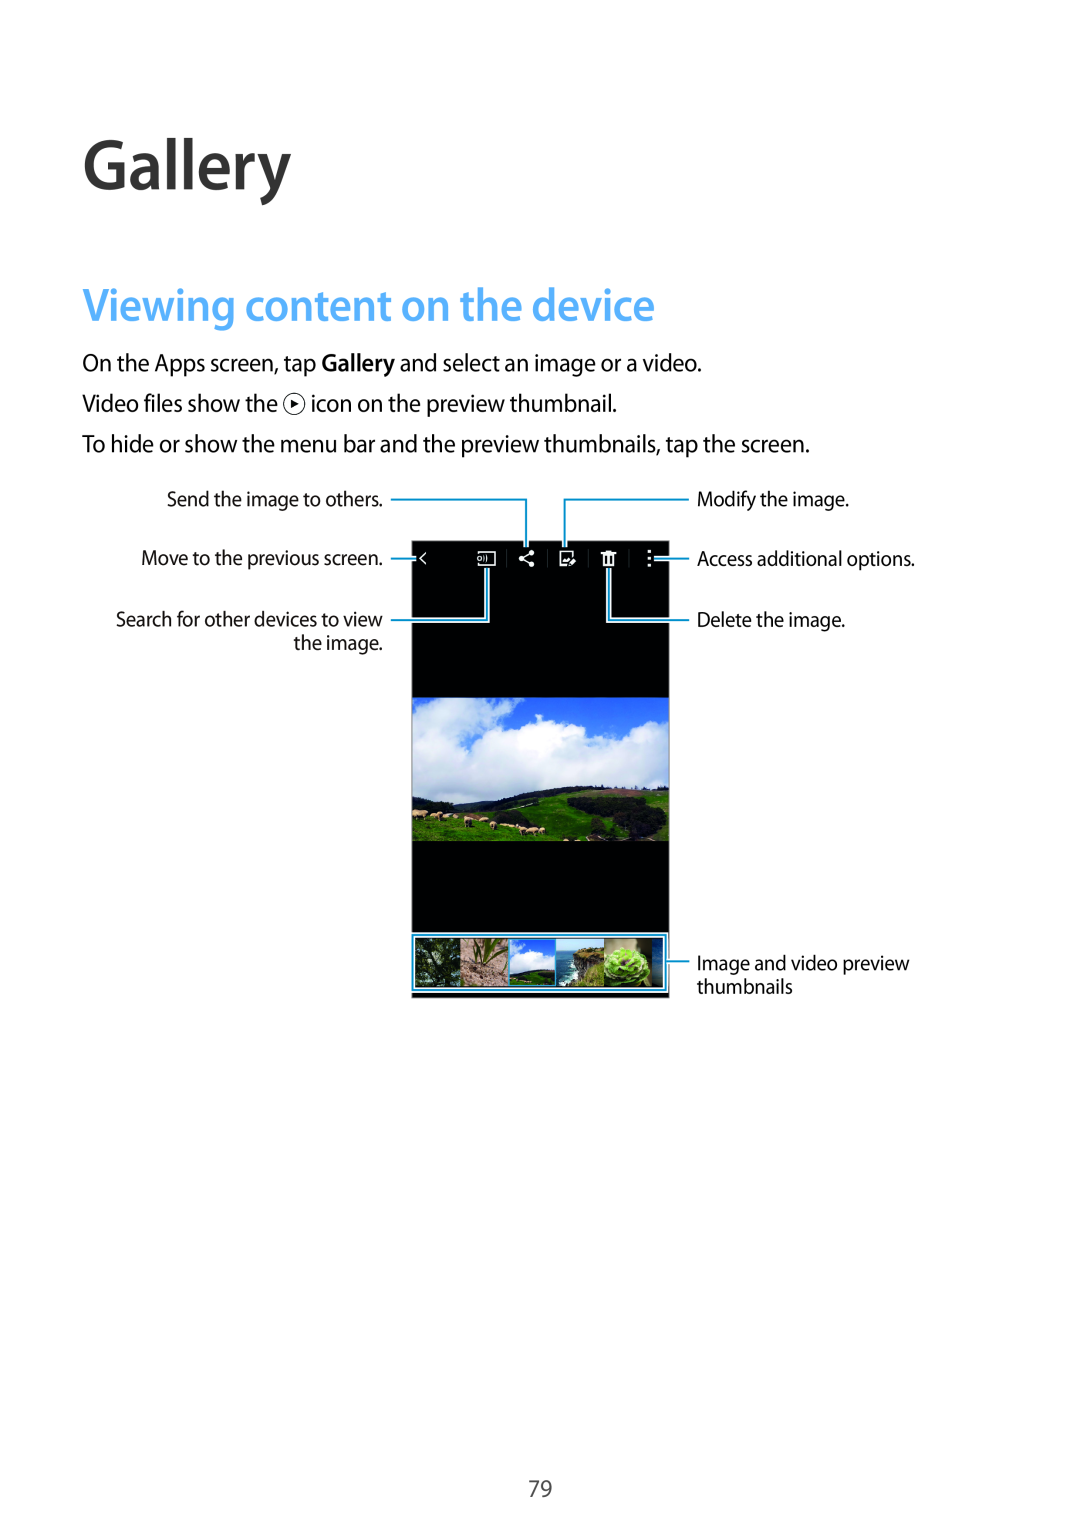 Samsung SM-A700FZDANEE manual Gallery, Viewing content on the device, Send the image to others Move to the previous screen 